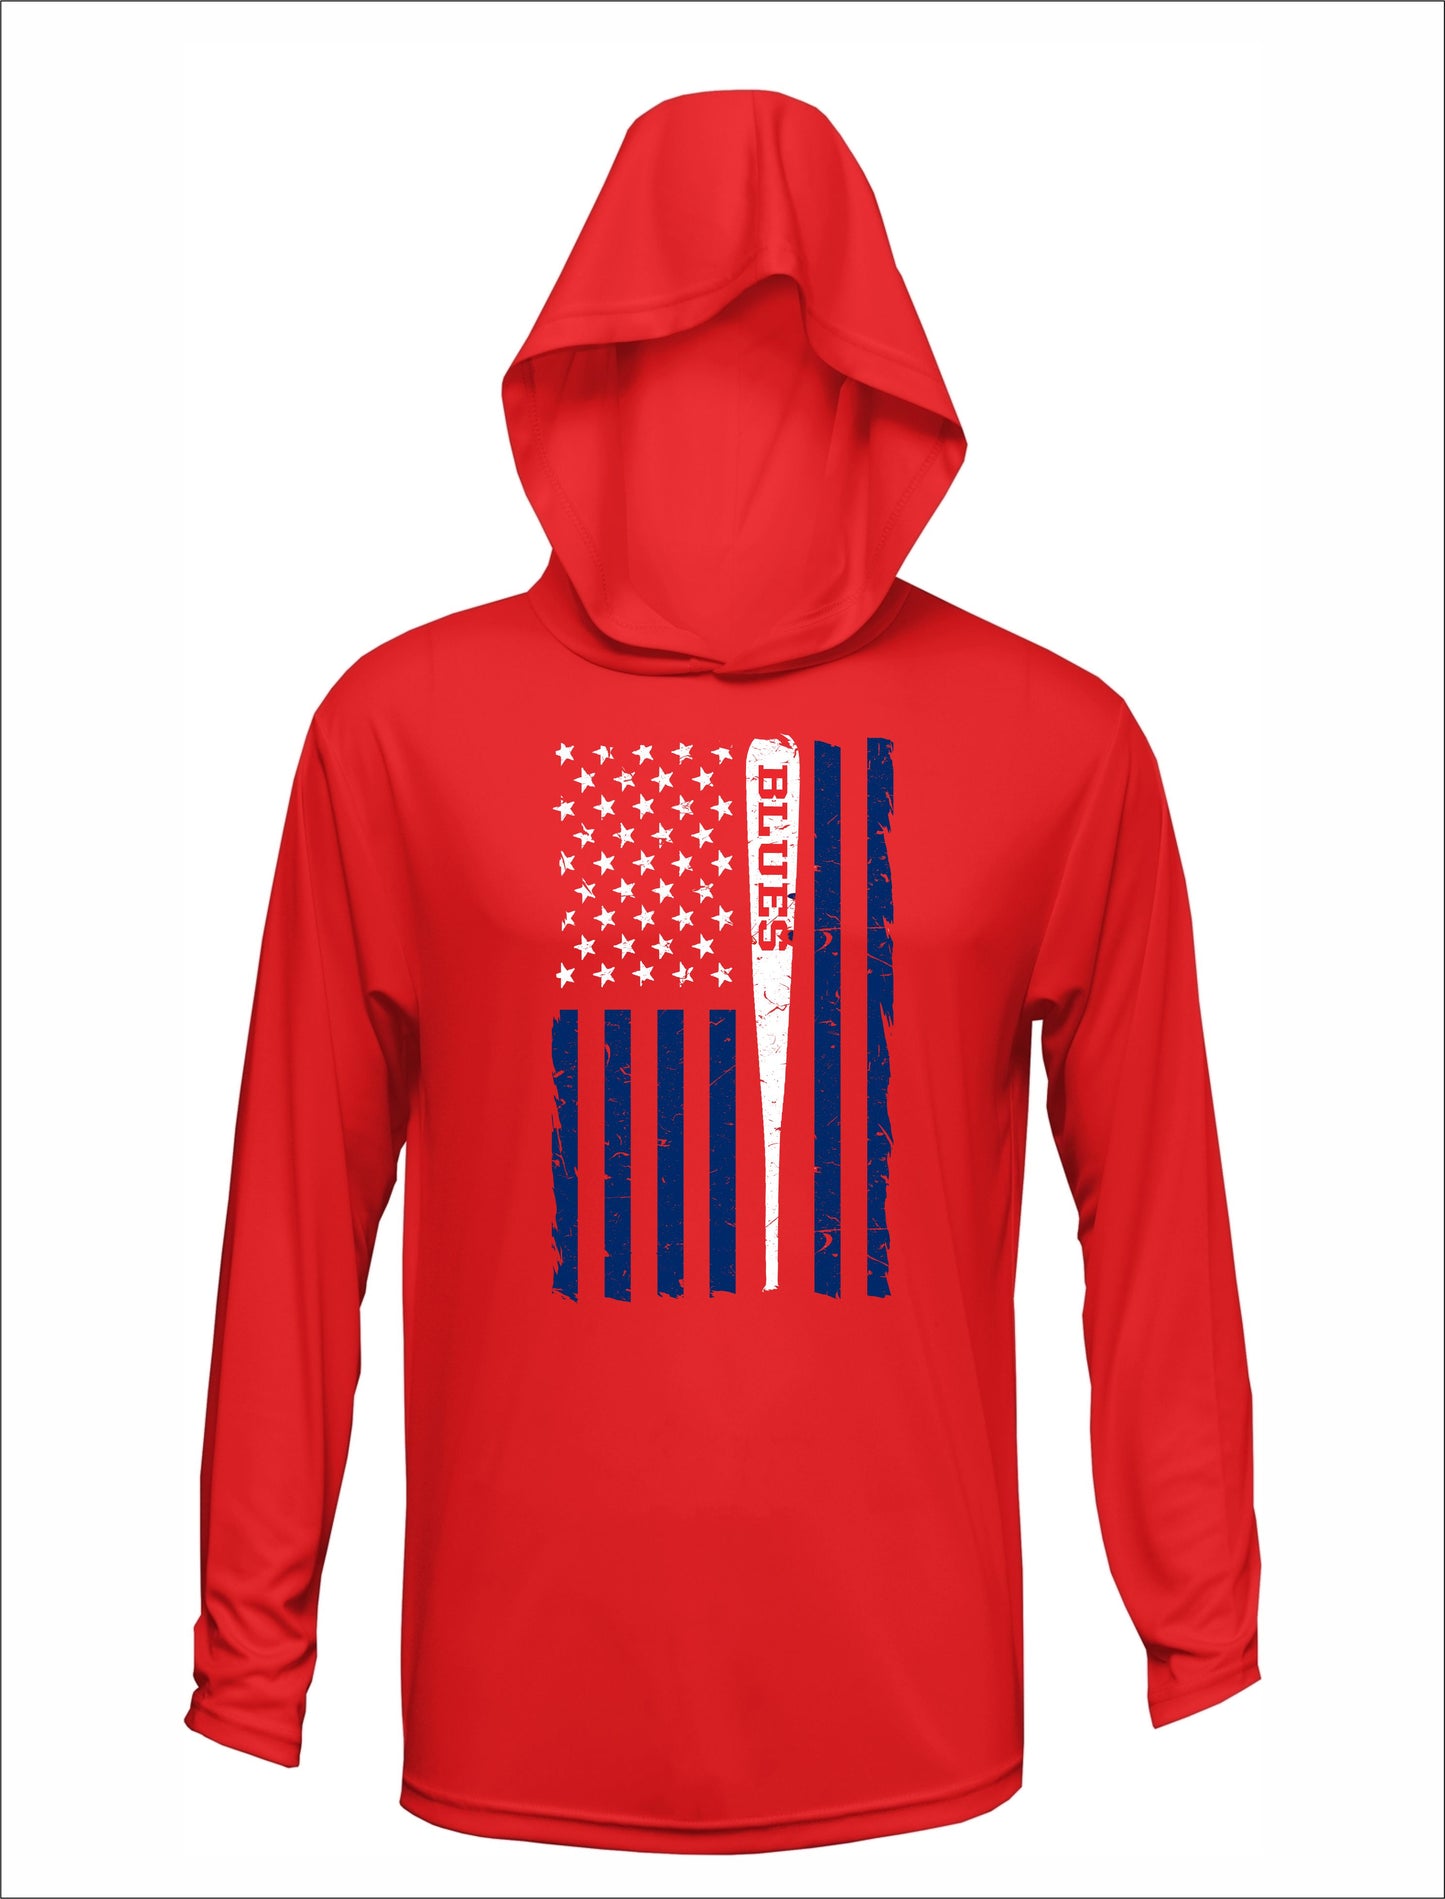 TX BLUES FLAG STYLE DRI-FIT TEE WITH HOOD